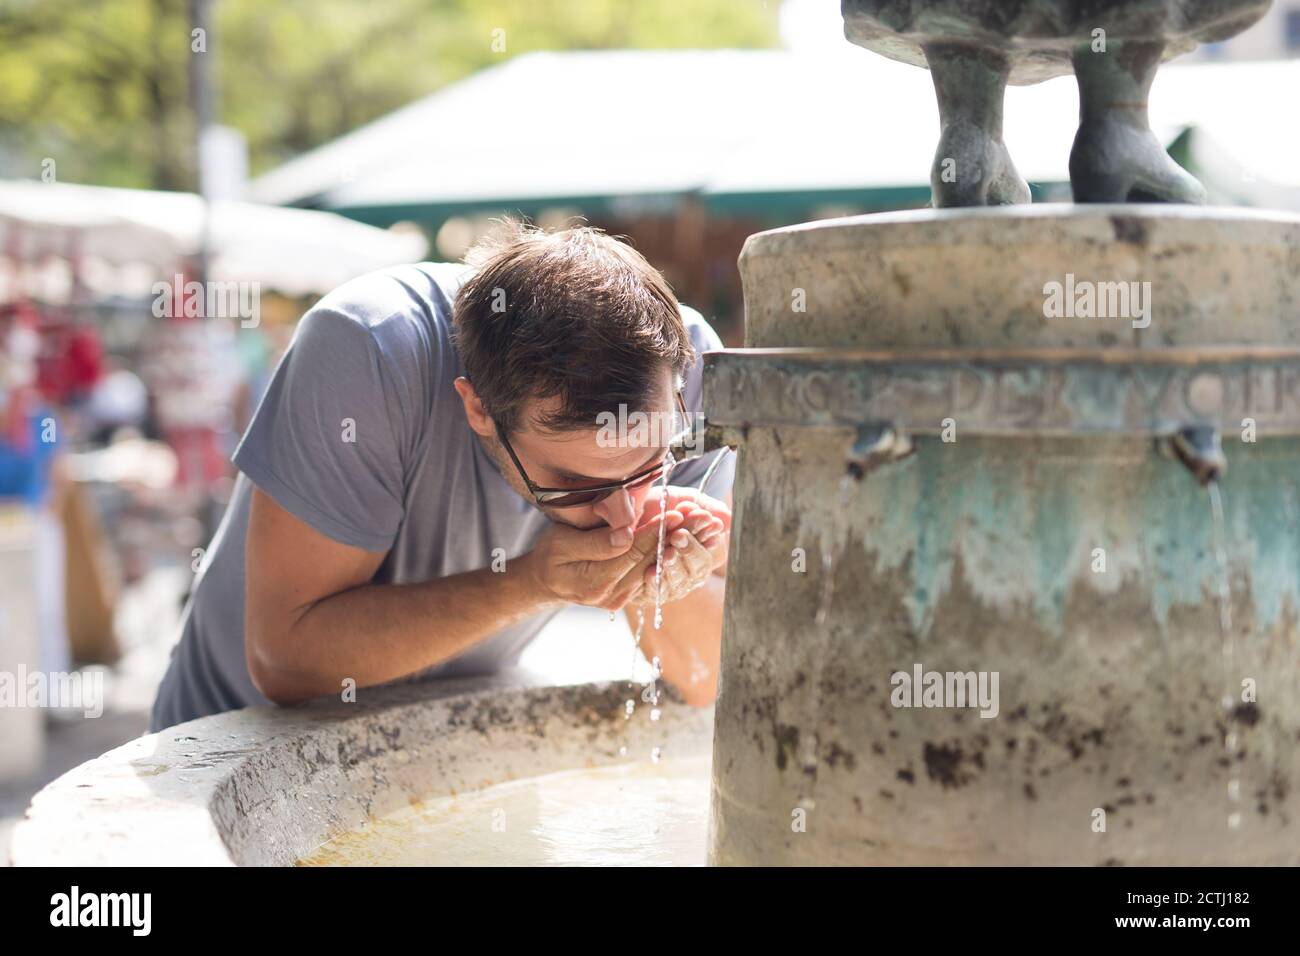 Thirsty young casual cucasian man drinking water from public city fountain on a hot summer day Stock Photo